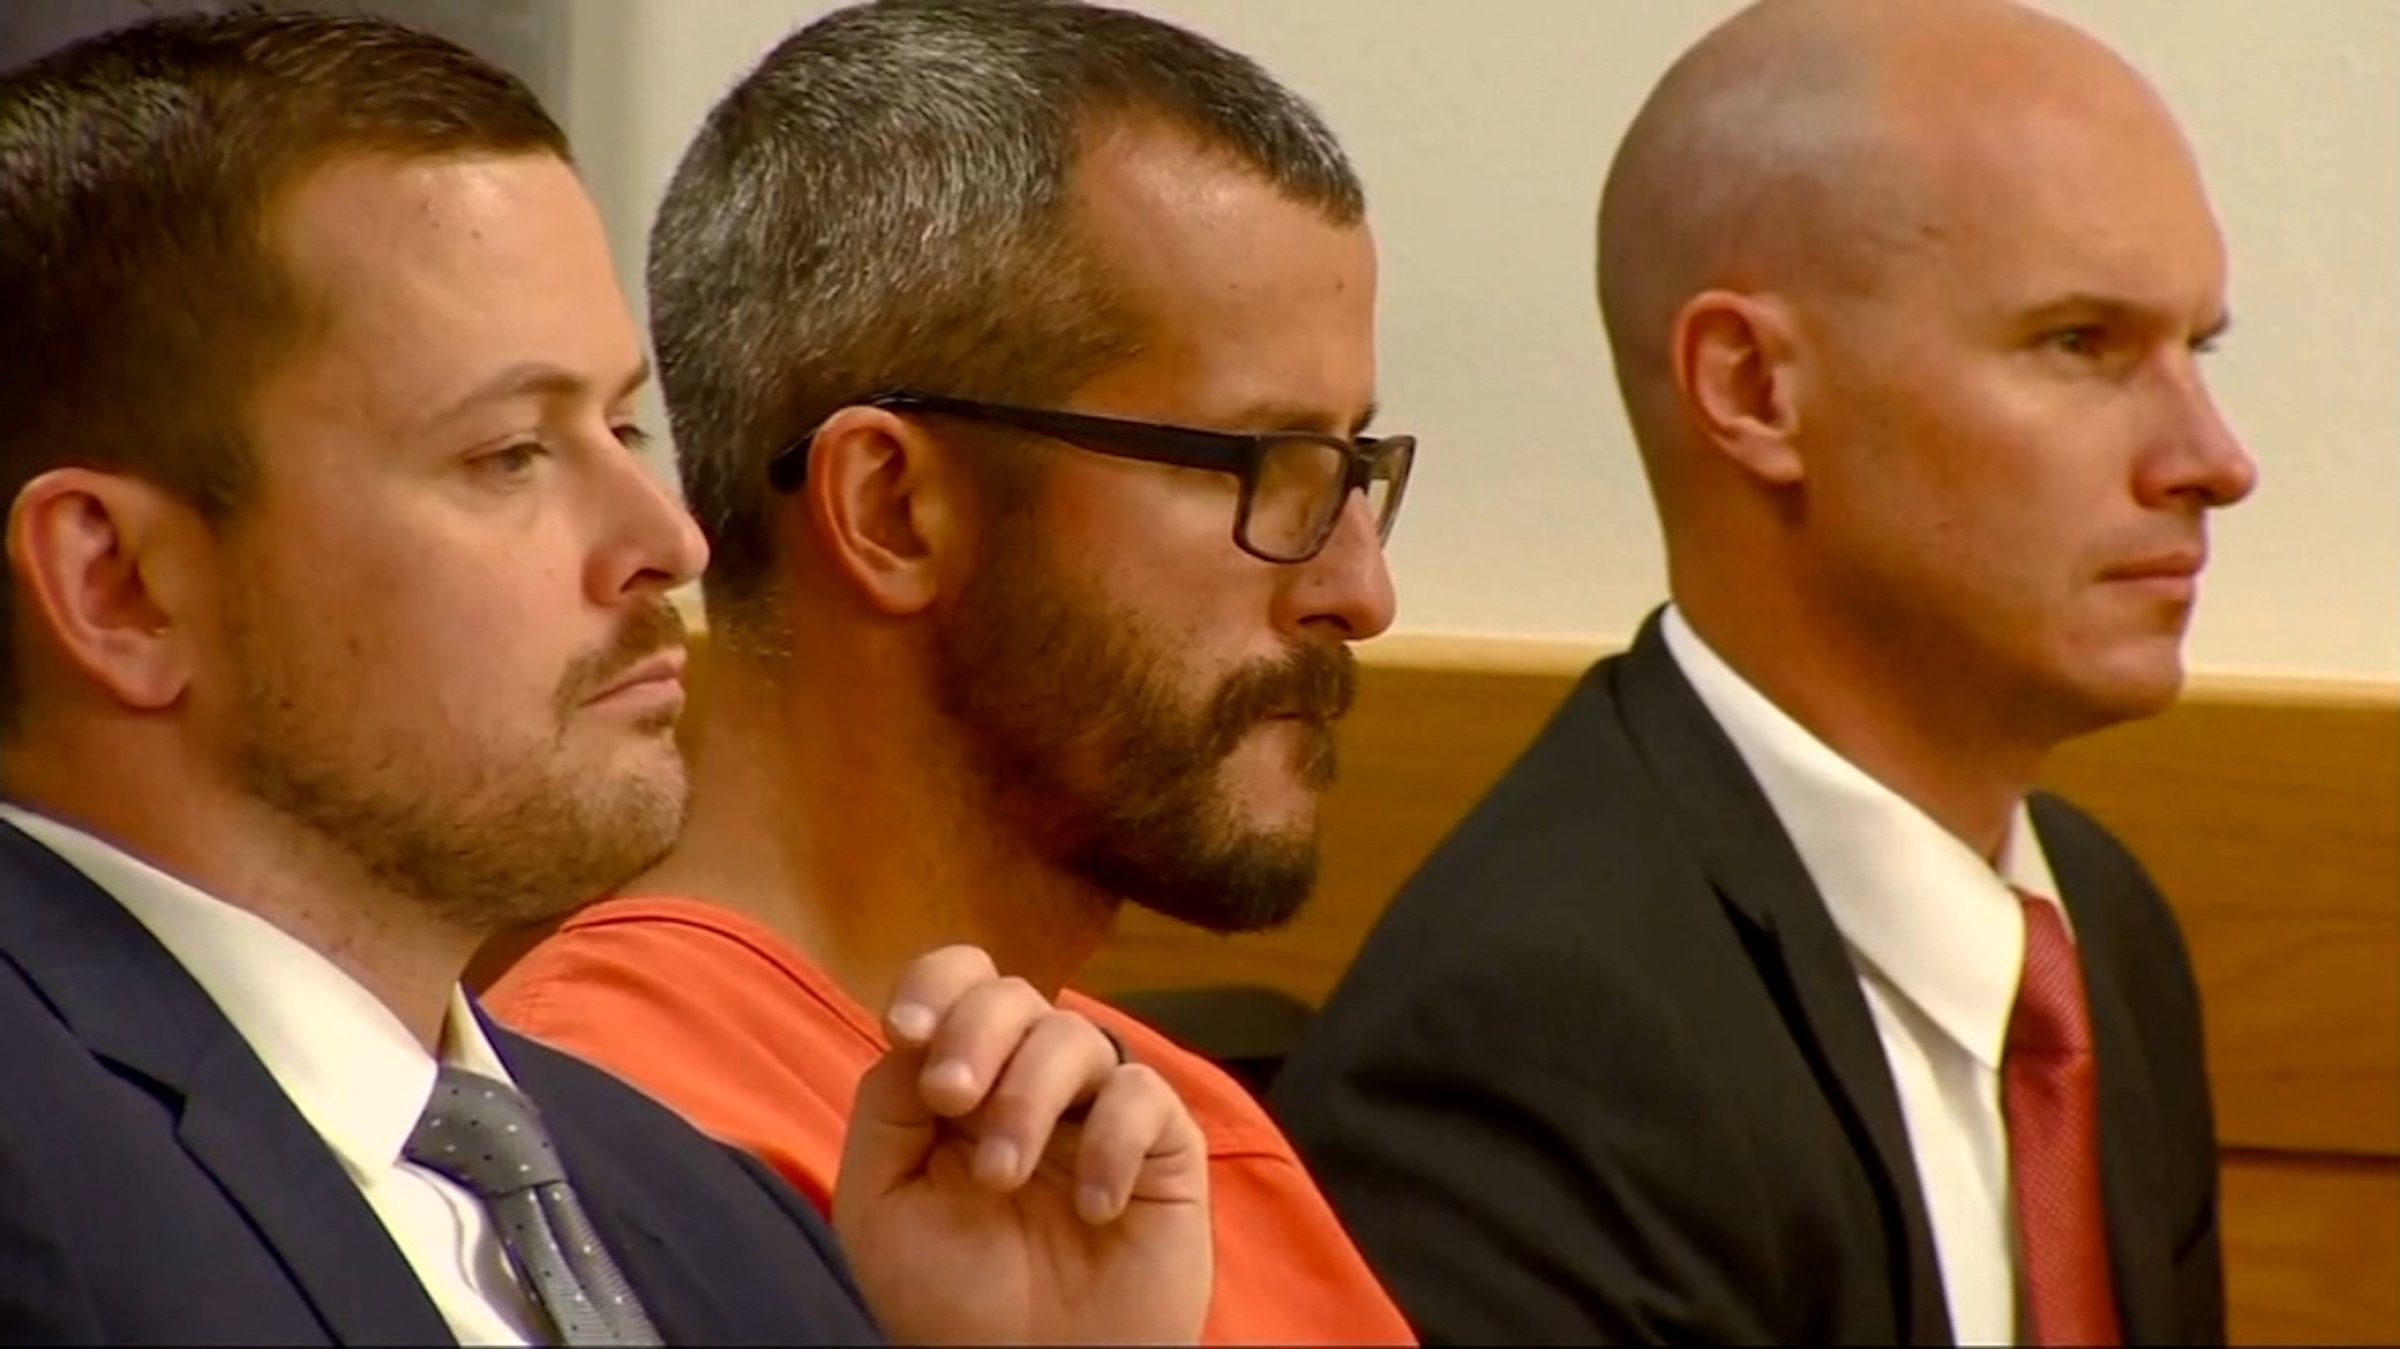 Chris Watts Netflix doc What to know about the murders before watching